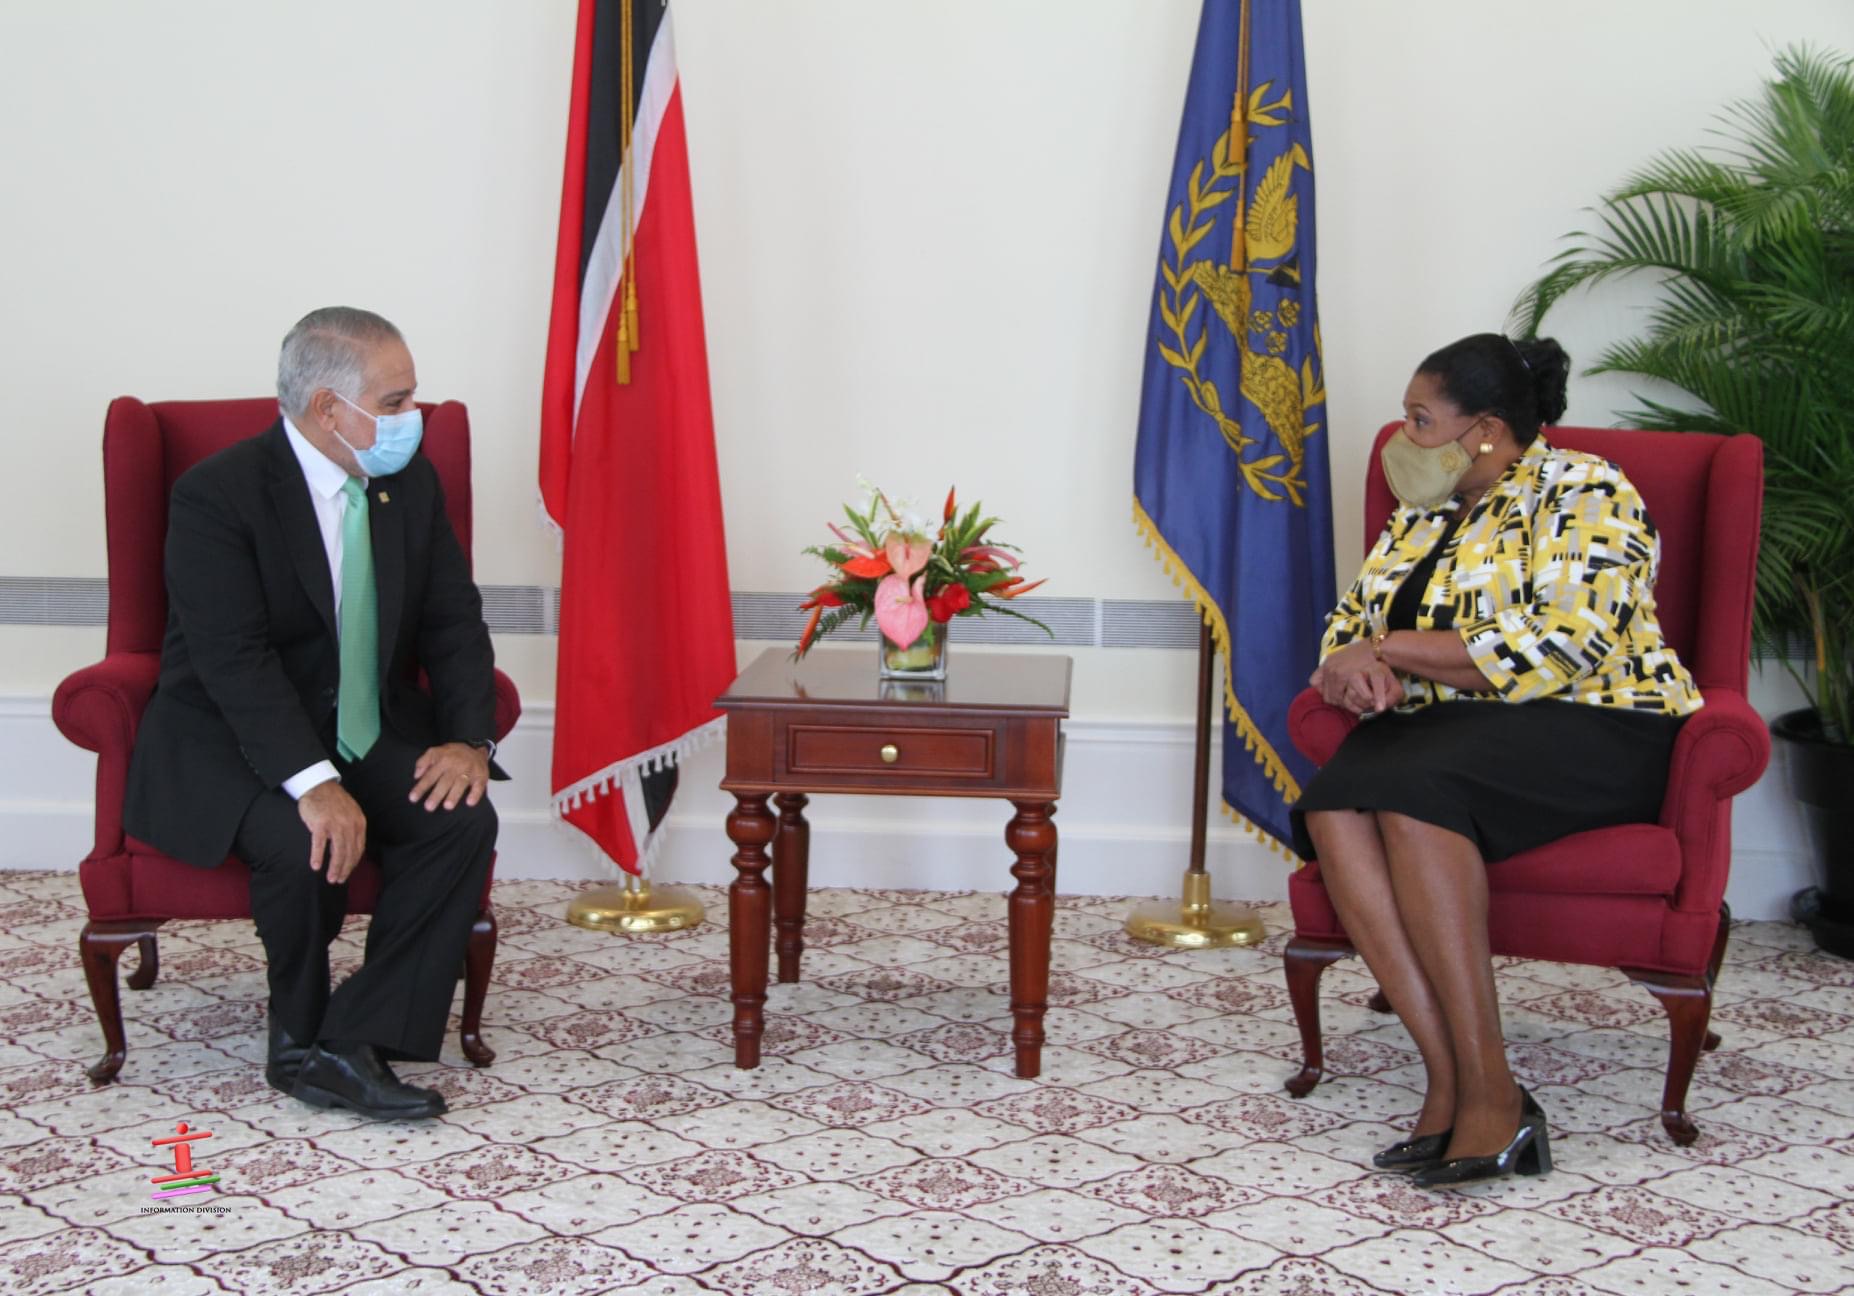 Secretary General of the Assoc. of Caribbean States paid the President a courtesy call